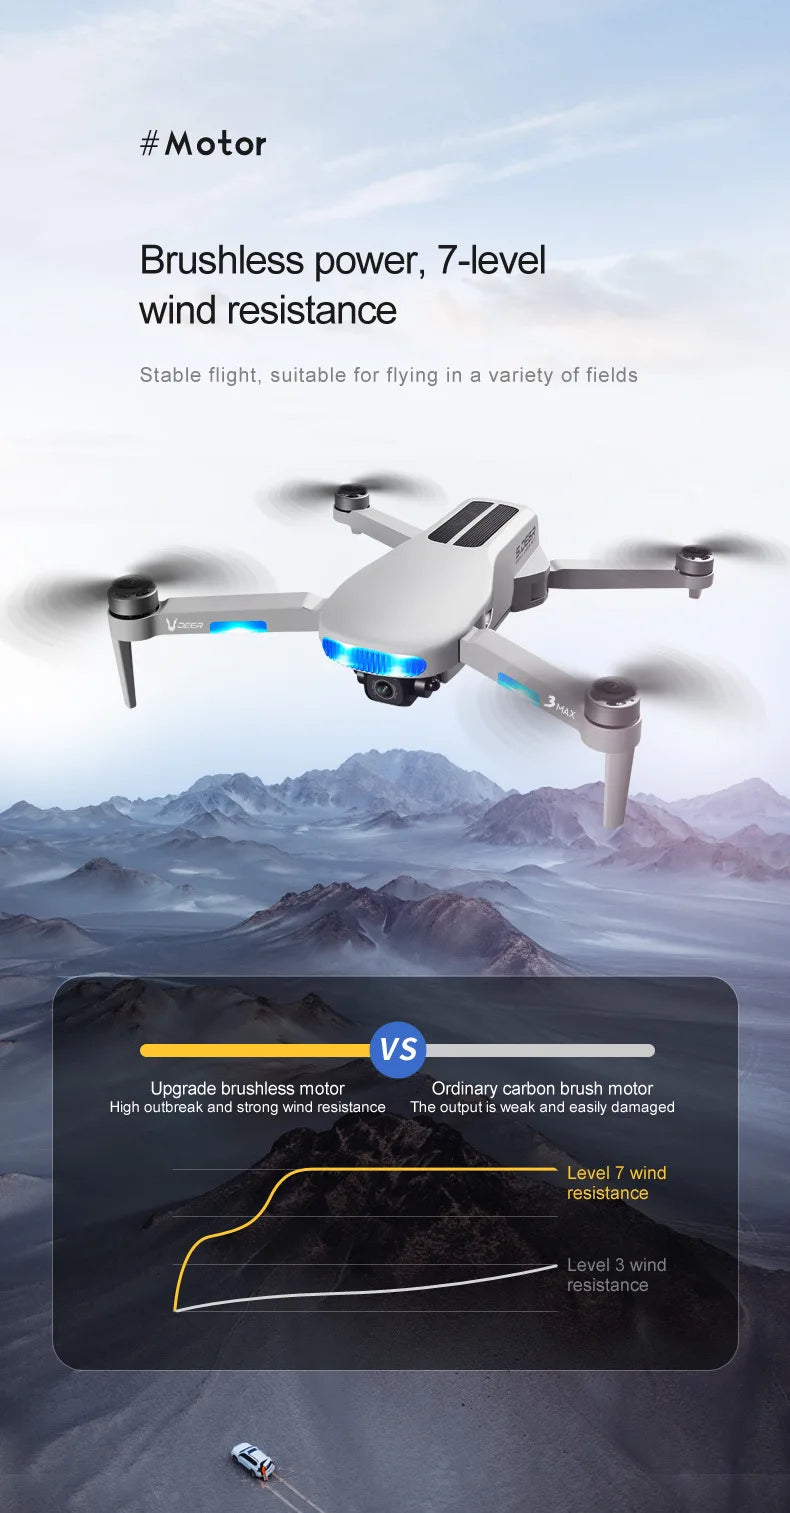 2023 New LU3 Max GPS Drone, #Motor Brushless power, 7-level wind resistance